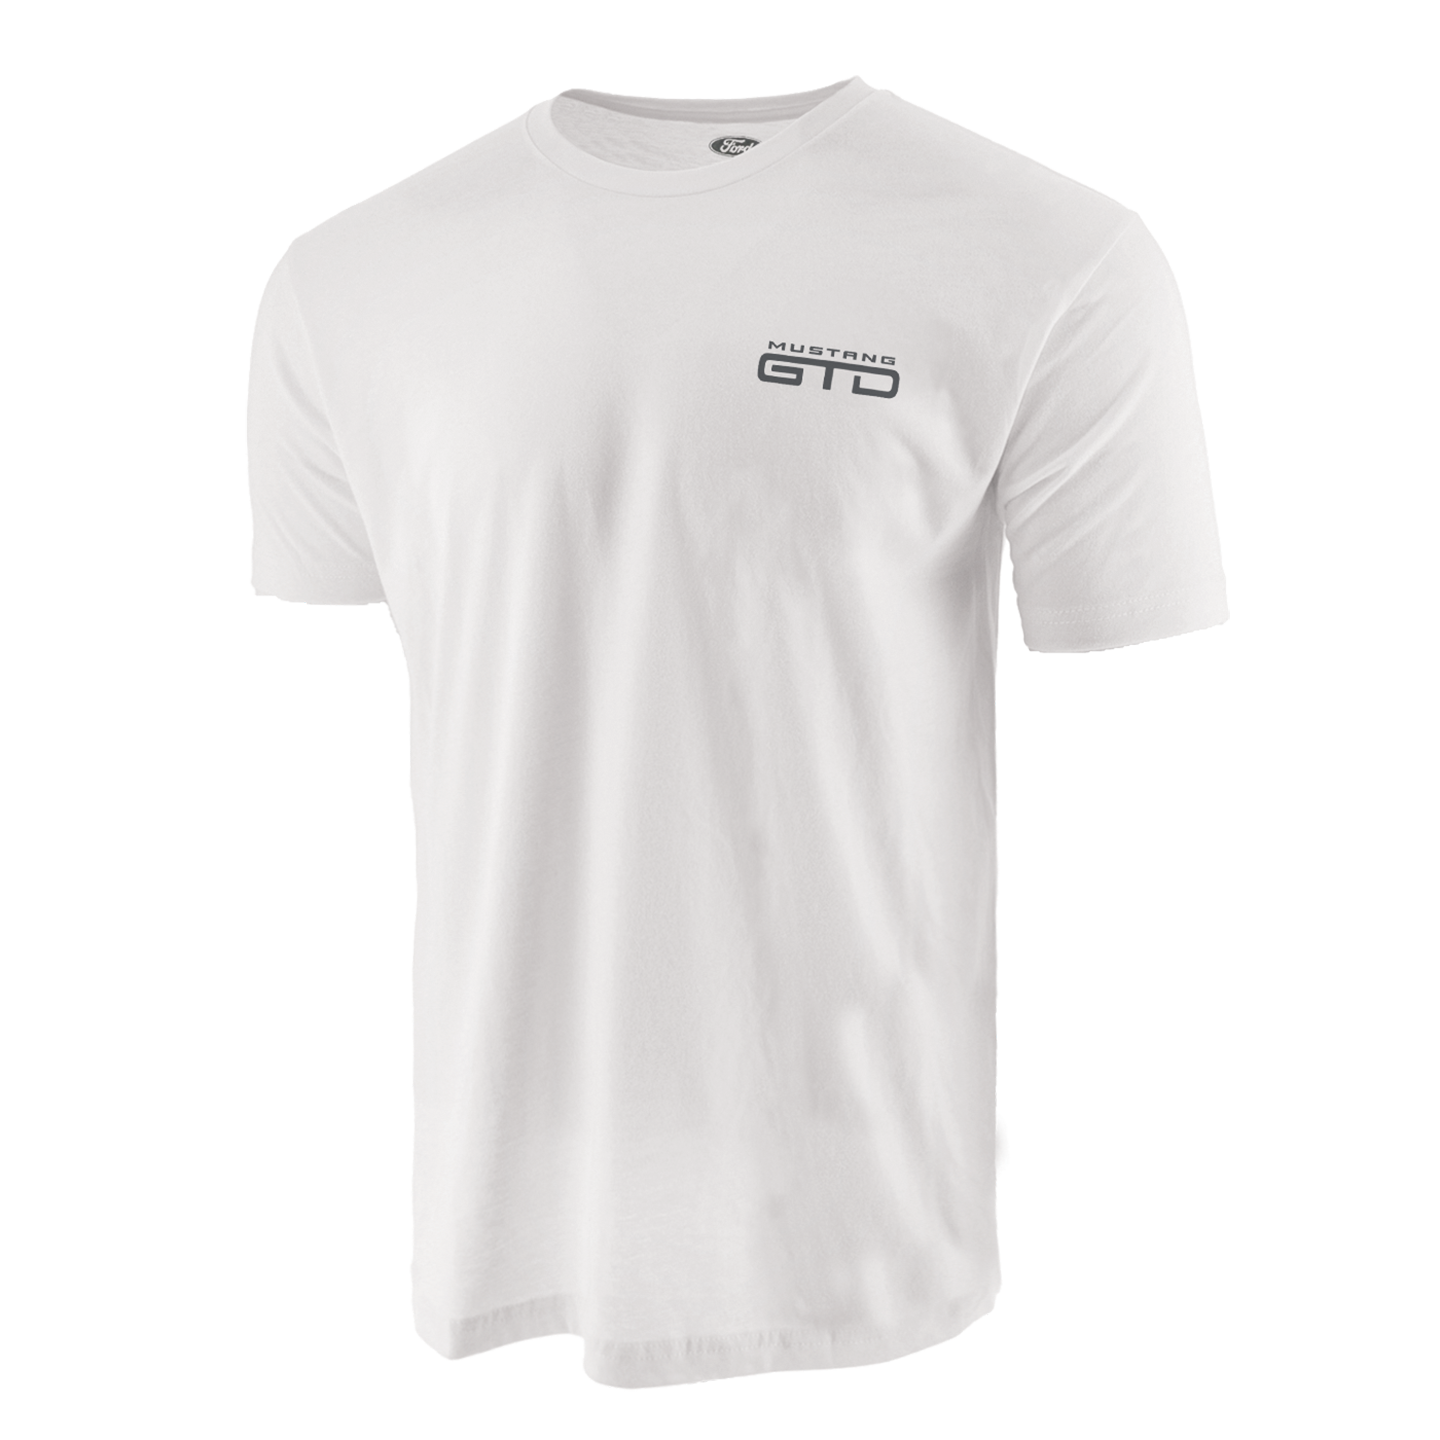 Ford Mustang GTD Shirt - Official Ford Merchandise